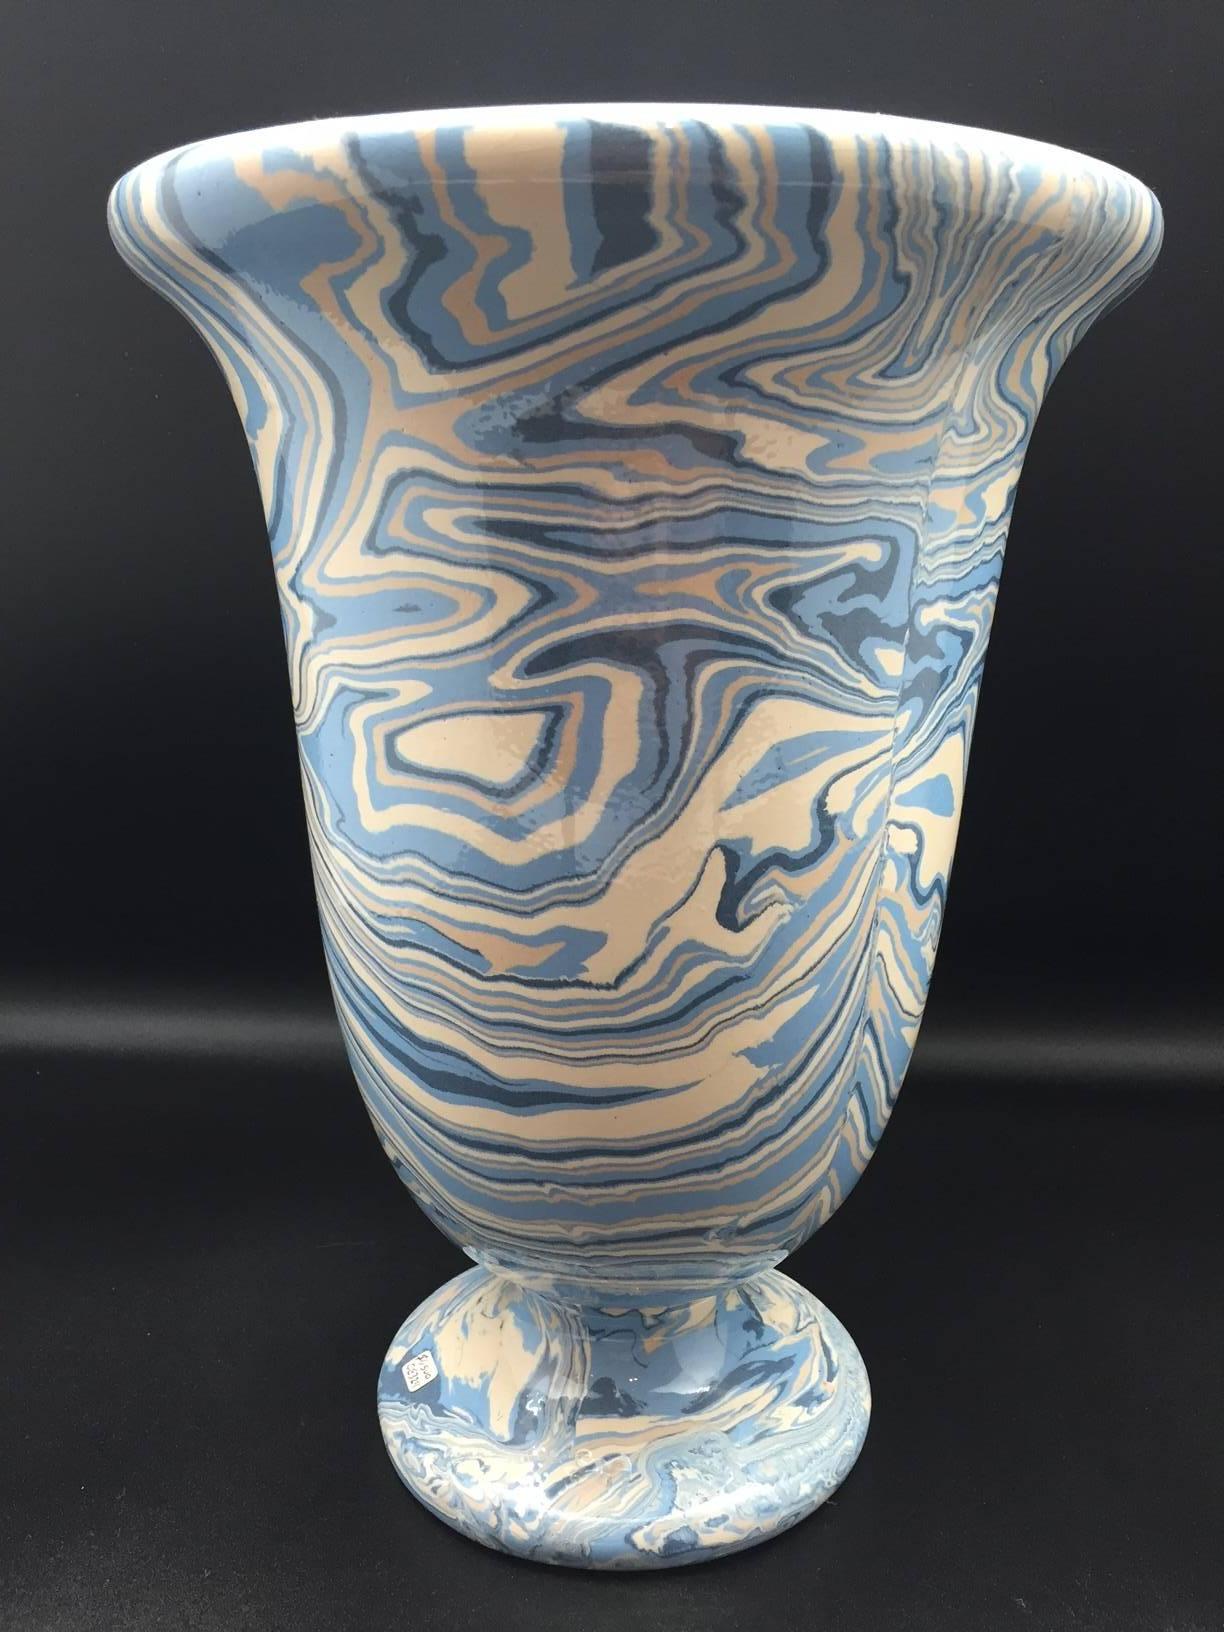 Marbleized blue ceramic Medicis vase by French potter Sylvie Saint-André Perrin. Similar to 18th century aptware faience ceramics from the South of France, the various colored clays are combined in a swirling marbleized pattern then fired and